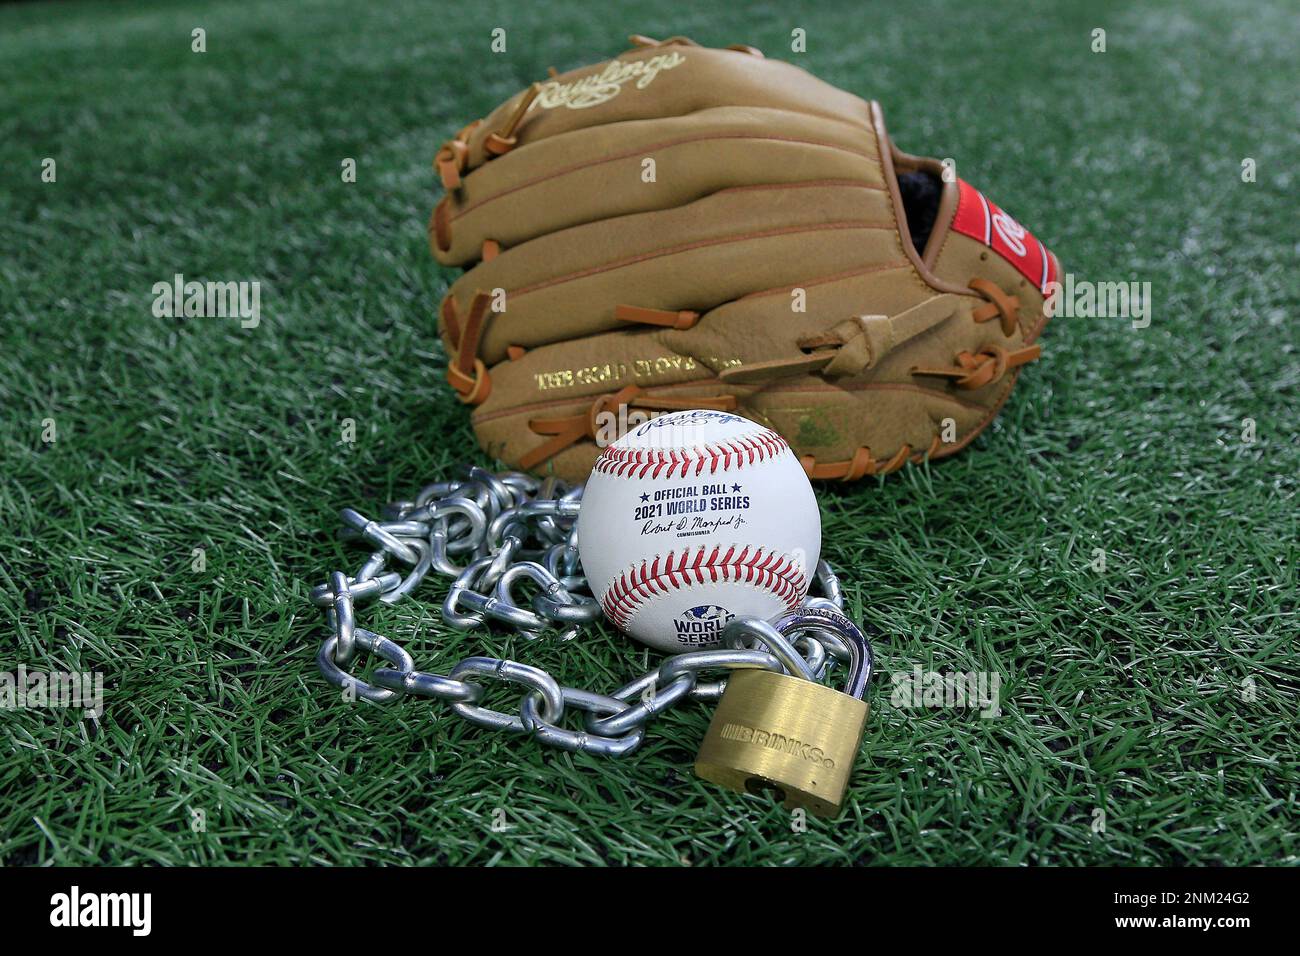 Atlanta, GA - January 09: An Official Rawlings Major League baseball sits  with a glove, lock and chain to represent the lockout between Major League  Baseball (MLB) and the Major League Baseball